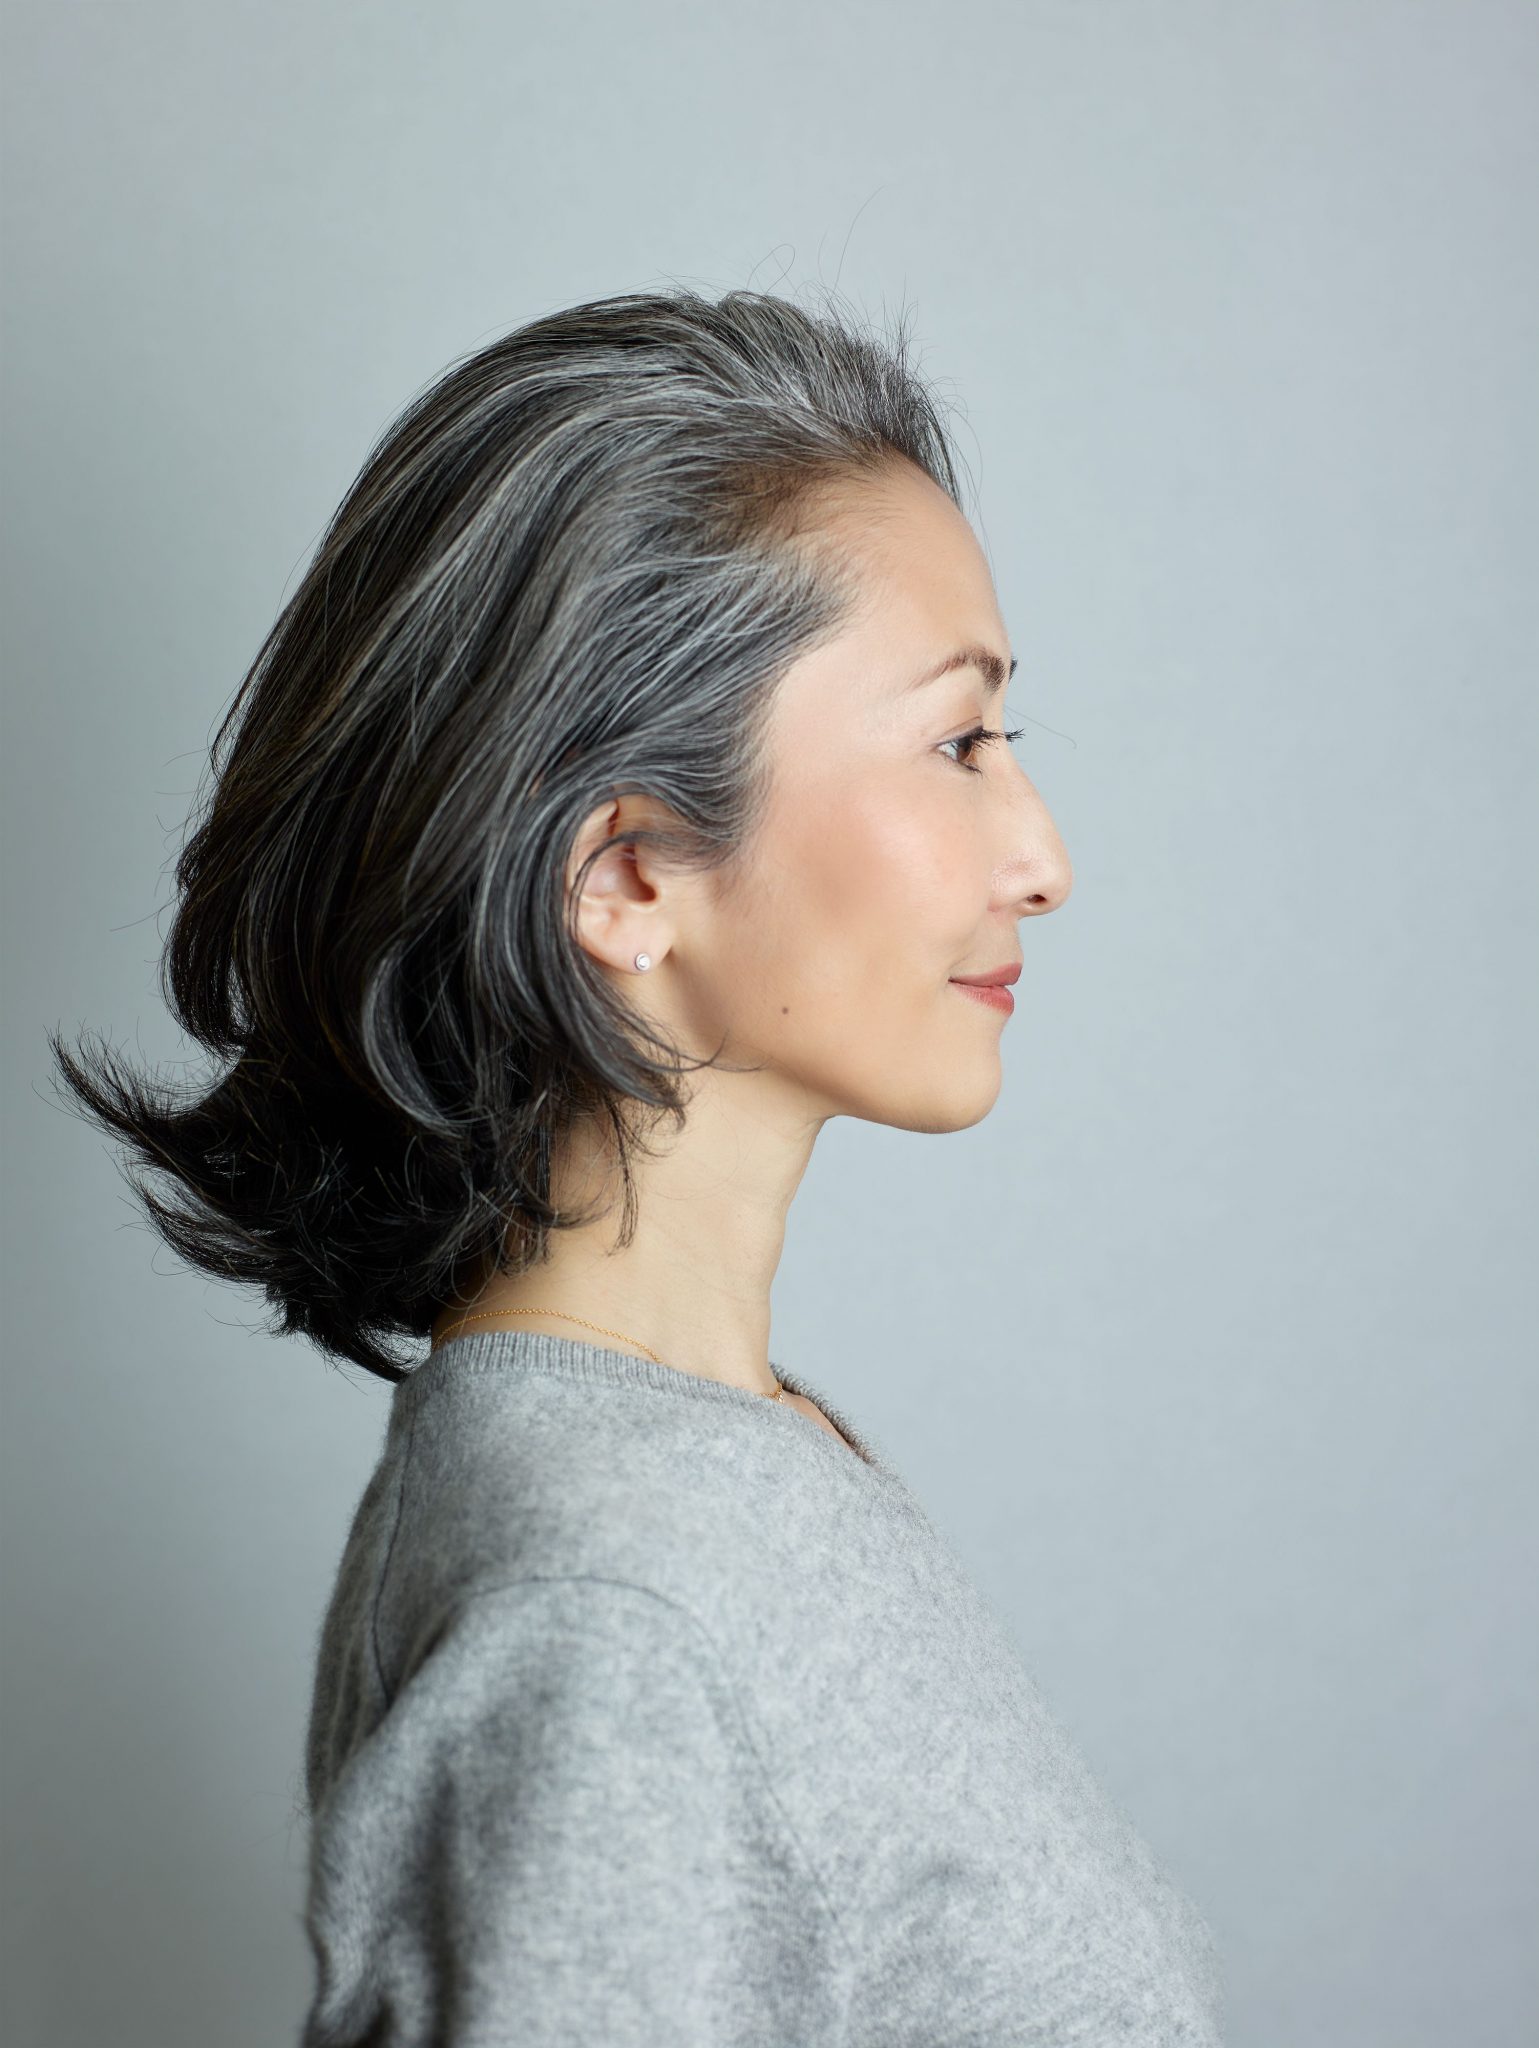 women's short haircuts have some grey hair options too